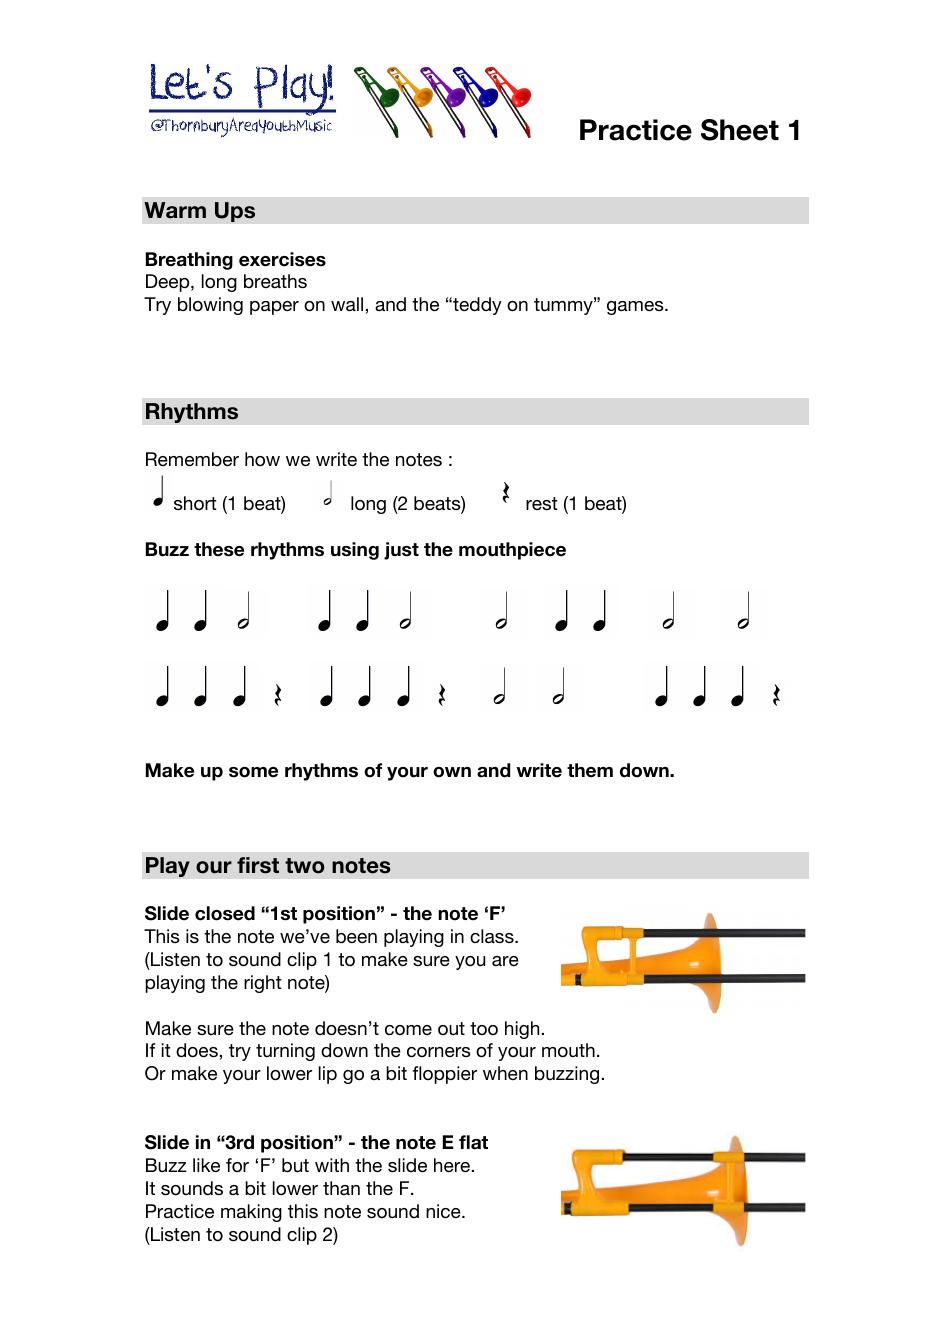 Trombone Practice Worksheet Preview – Thornbury Area Youth Music Apr 27 2021 Downloadable in PDF Format